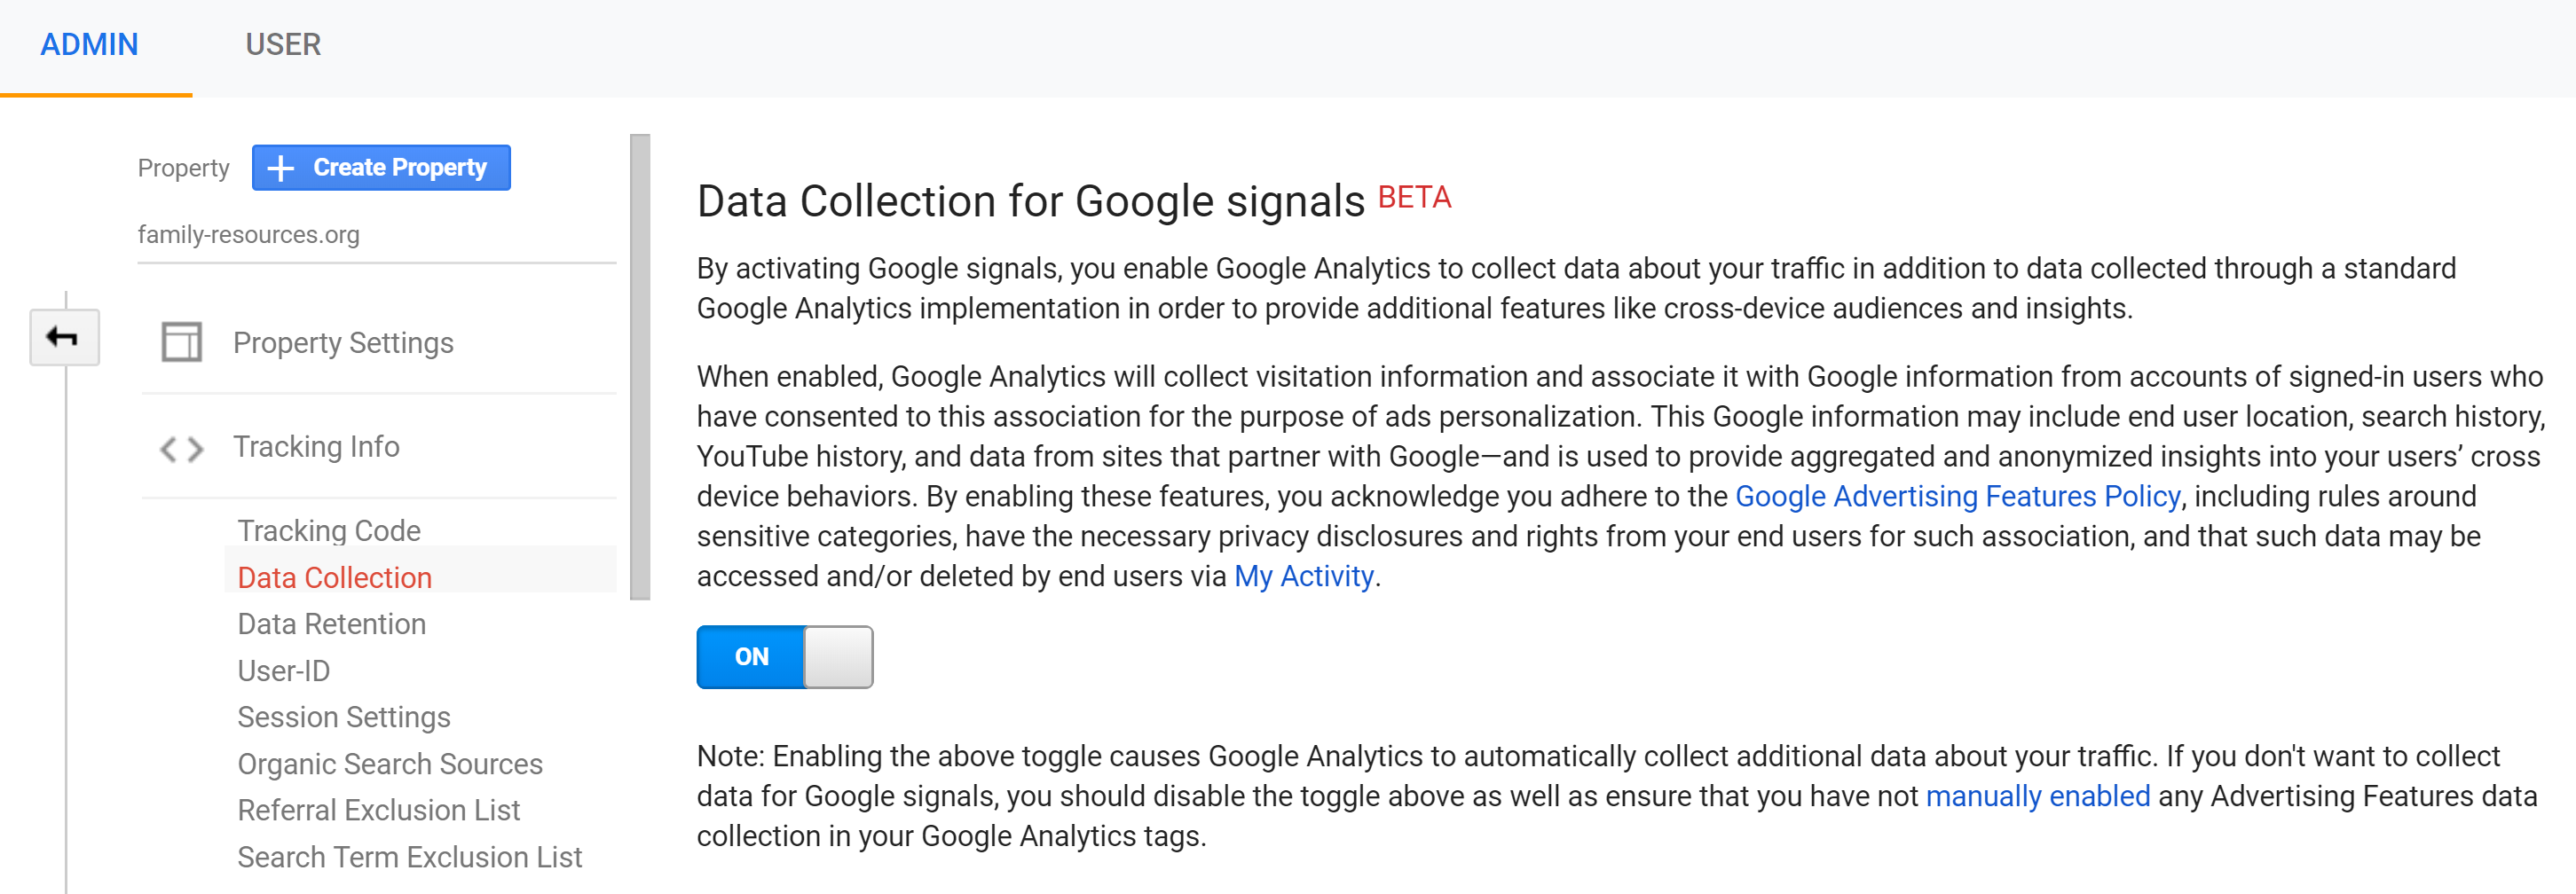 How to Activate Google Signals